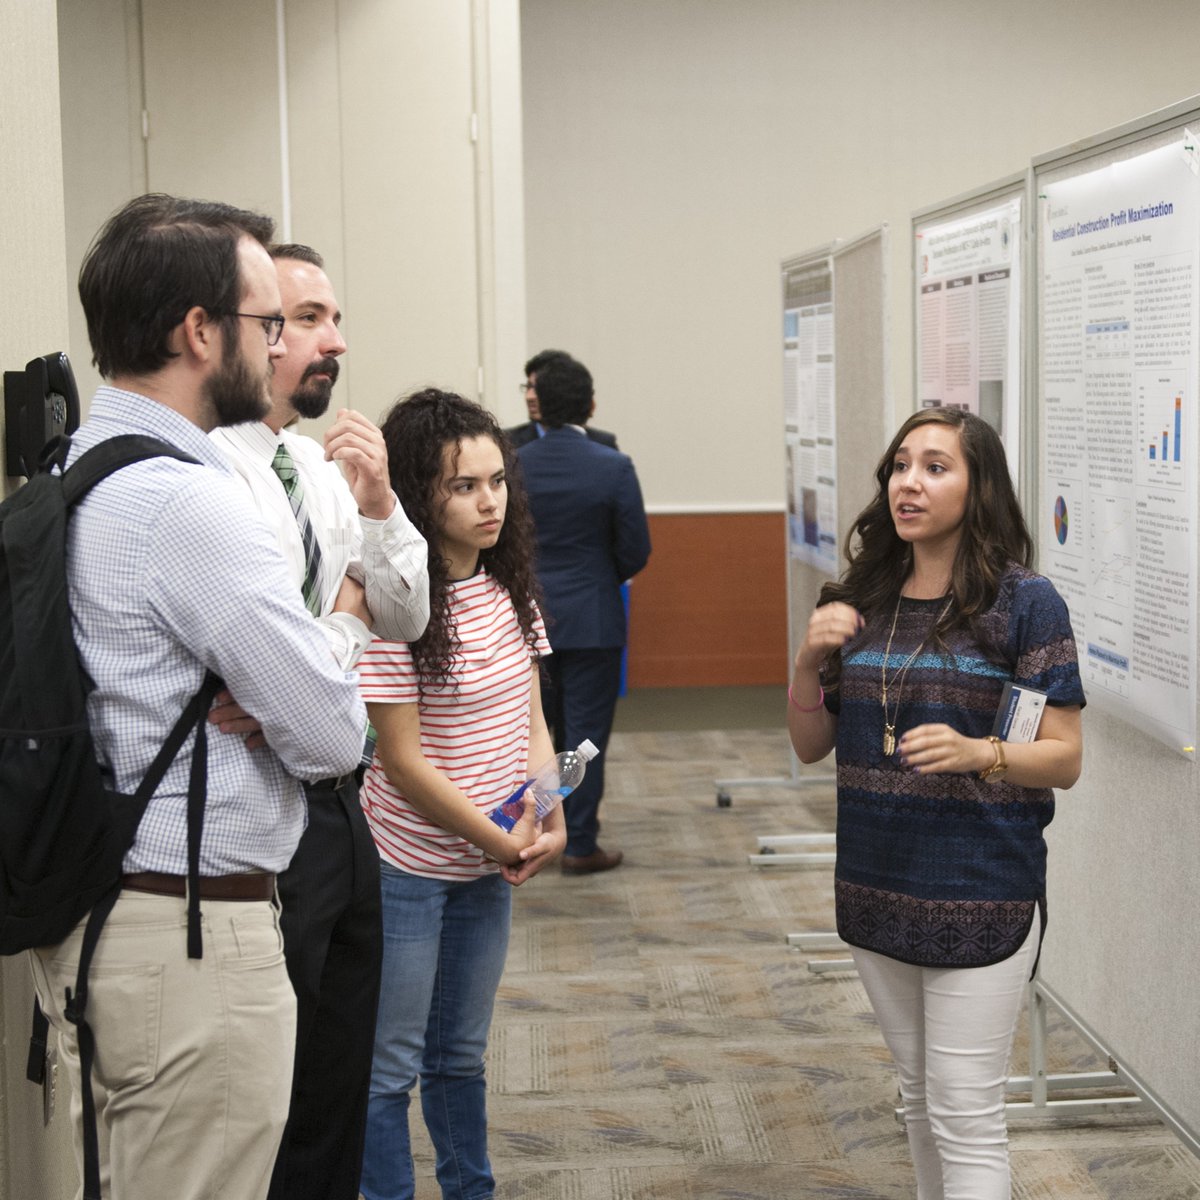 Discover, engage, and be inspired by the projects and research done by our talented Gators at the Impact Learning Showcase! 📍: UHD Mural Area 📅: Wed., 4/3 🕐: 1-3 p.m.